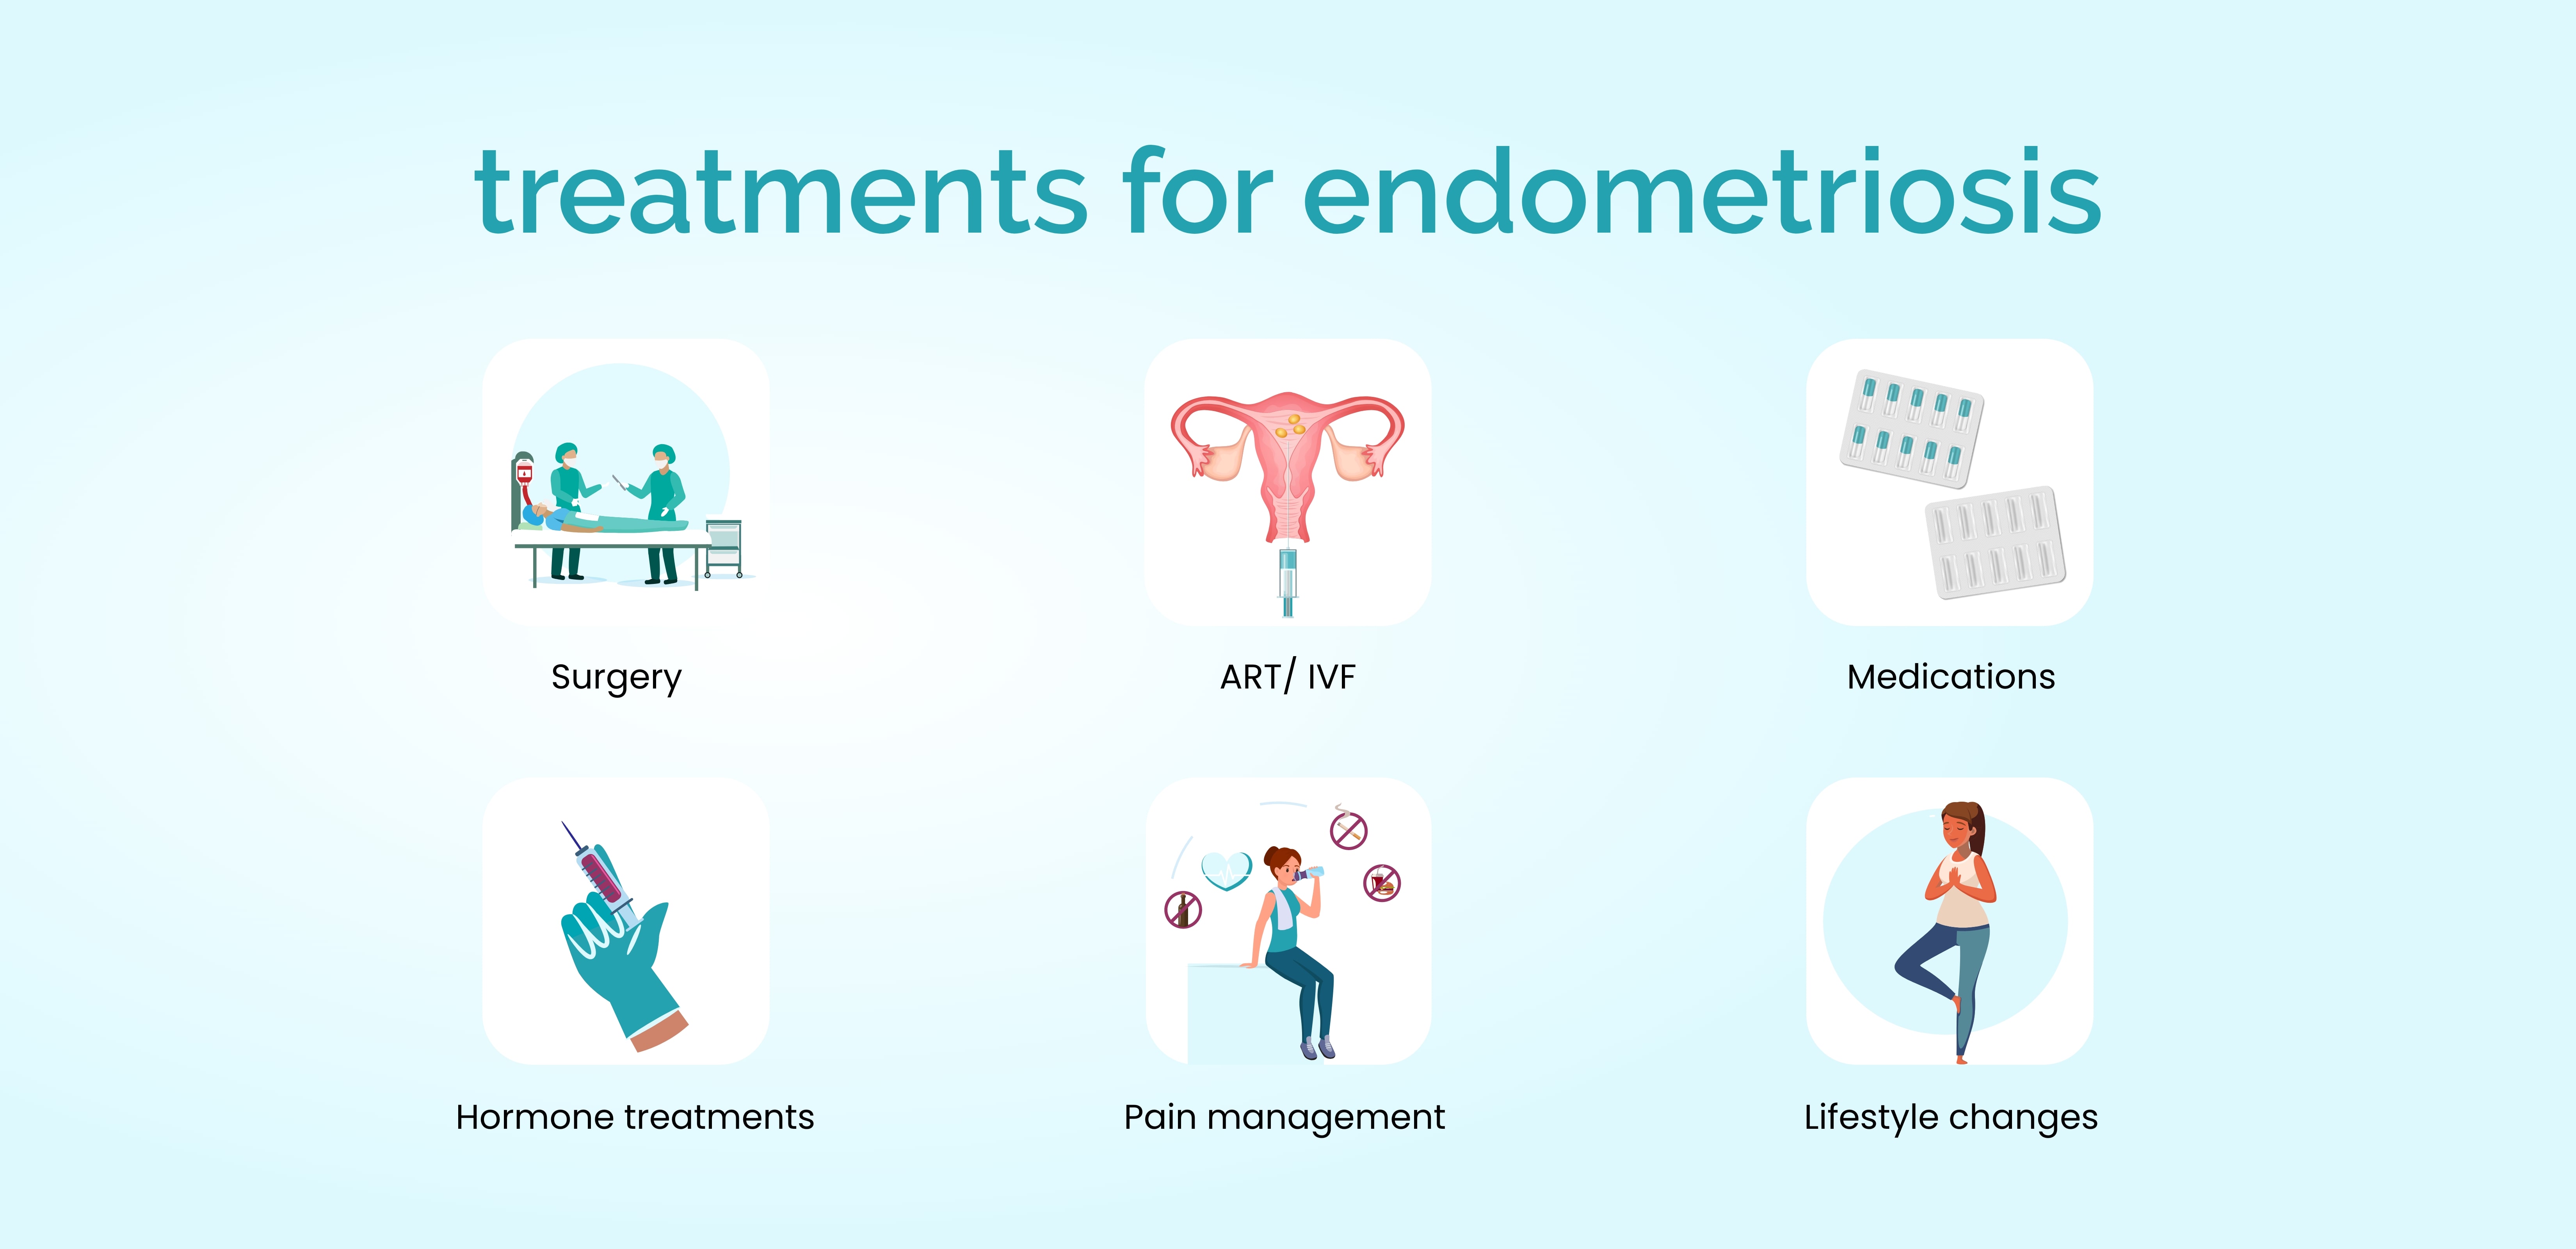 What are the treatments for endometriosis?